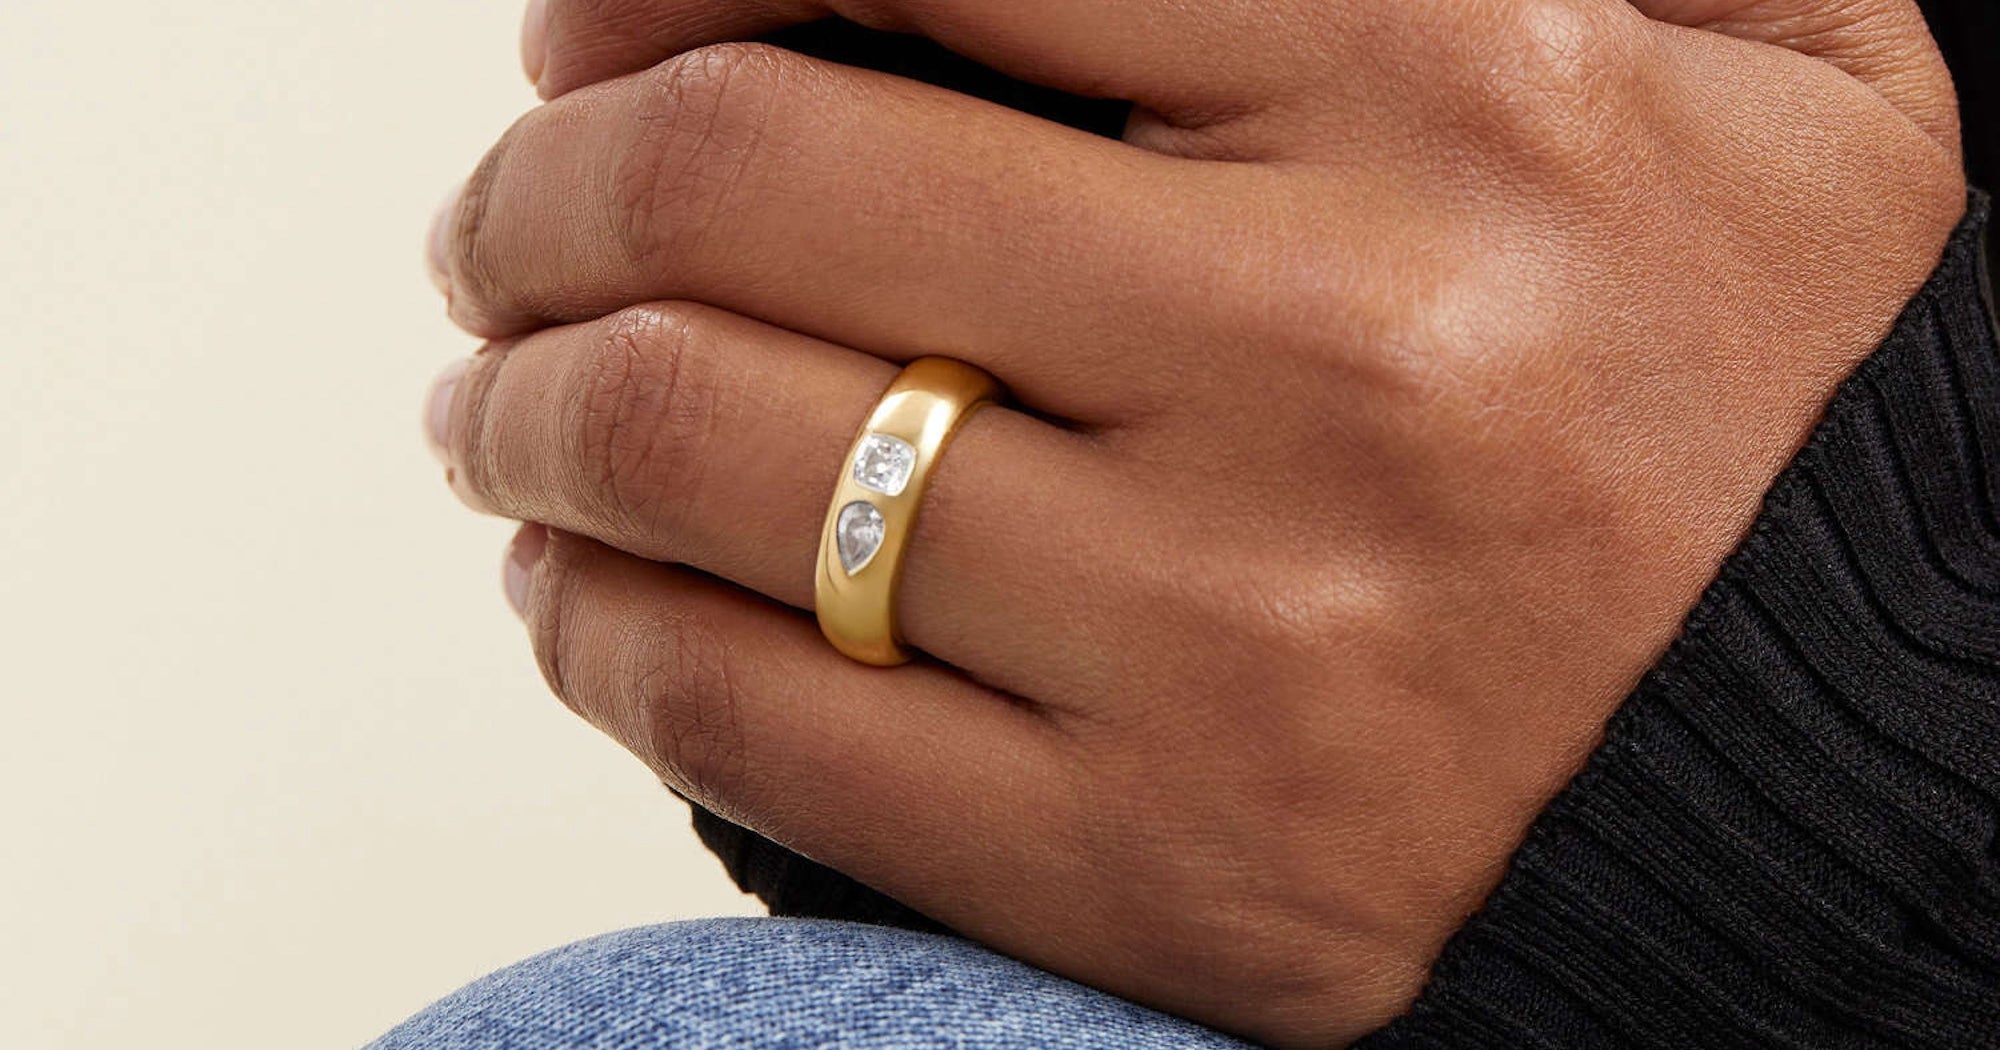 7 Engagement Ring Trends That Will Be Big In 2023, According to Experts